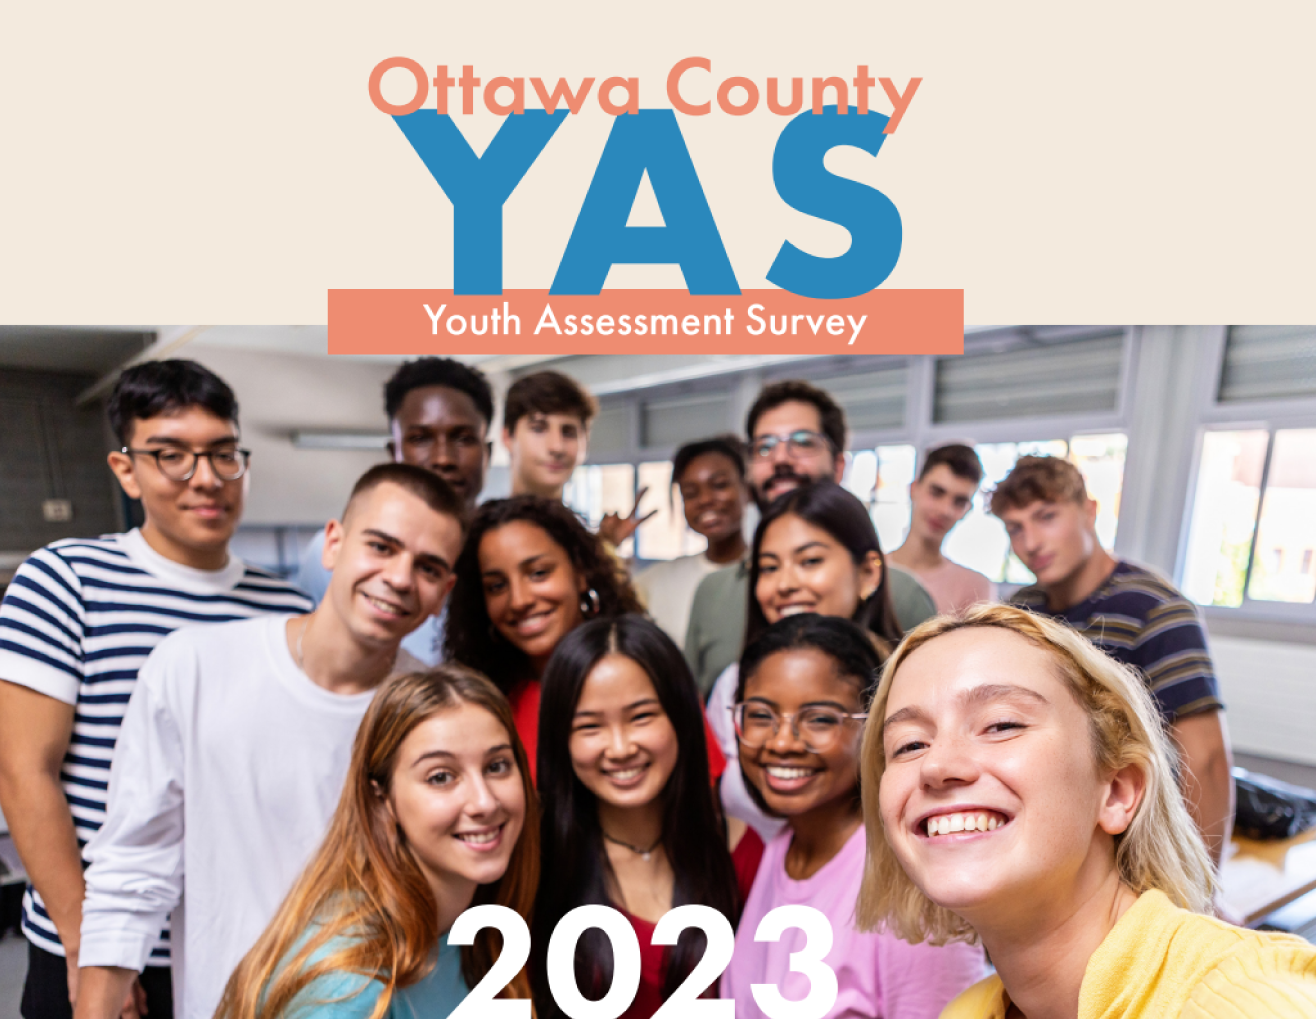 Youth Assessment Survey (YAS)